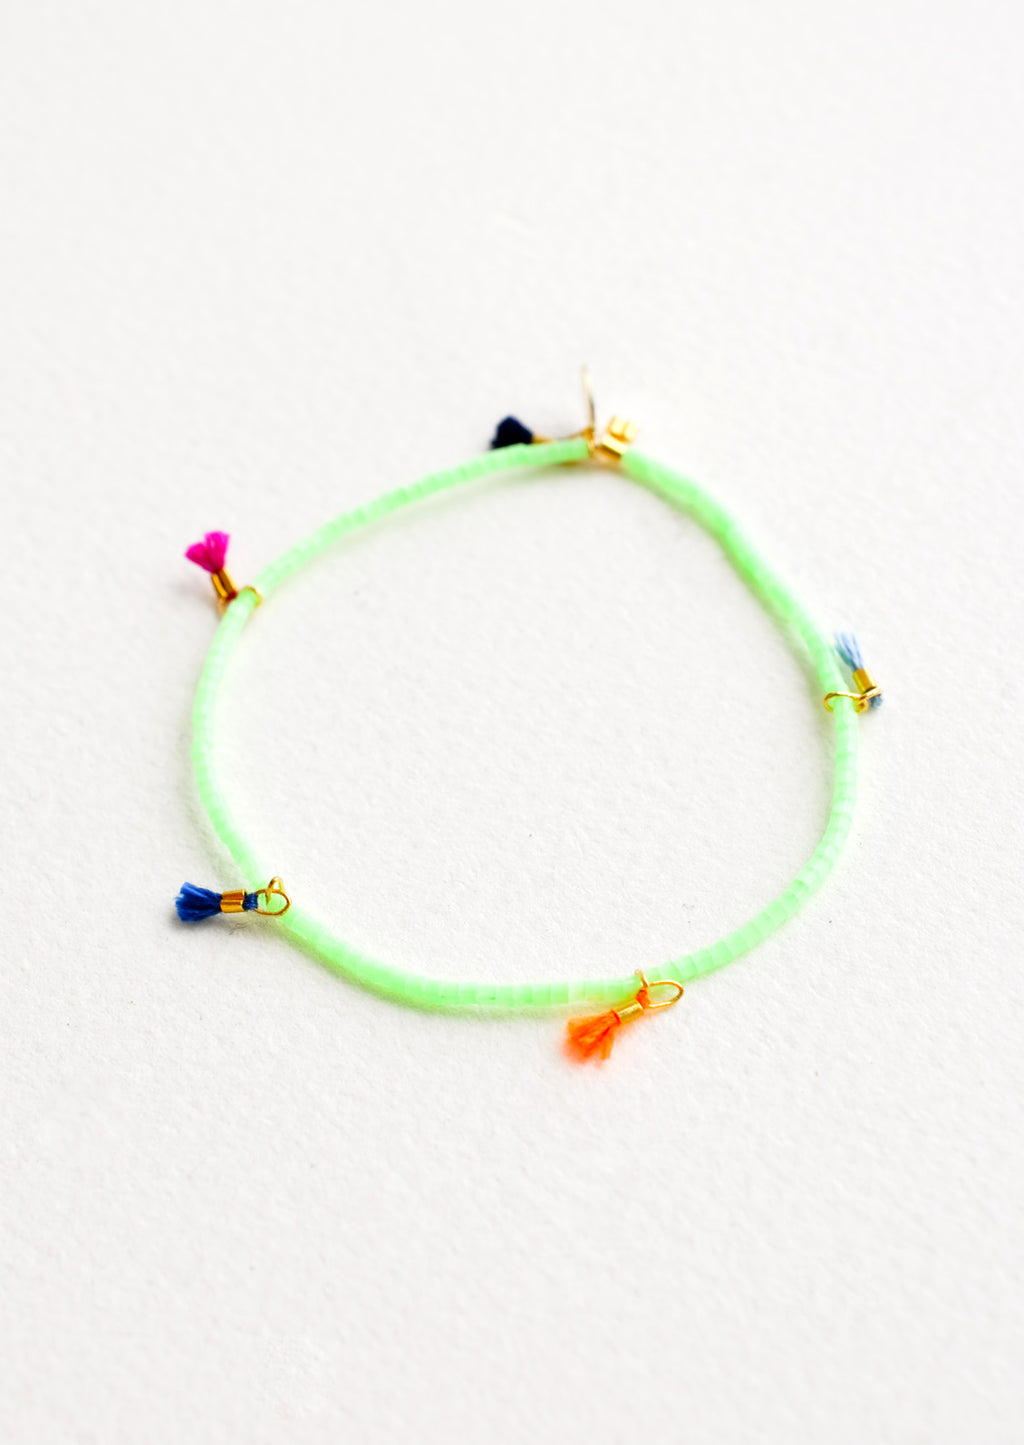 Mint Chip: Bracelet featuring green beads interspersed with 5 small multicolor string tassels on an elastic cord.